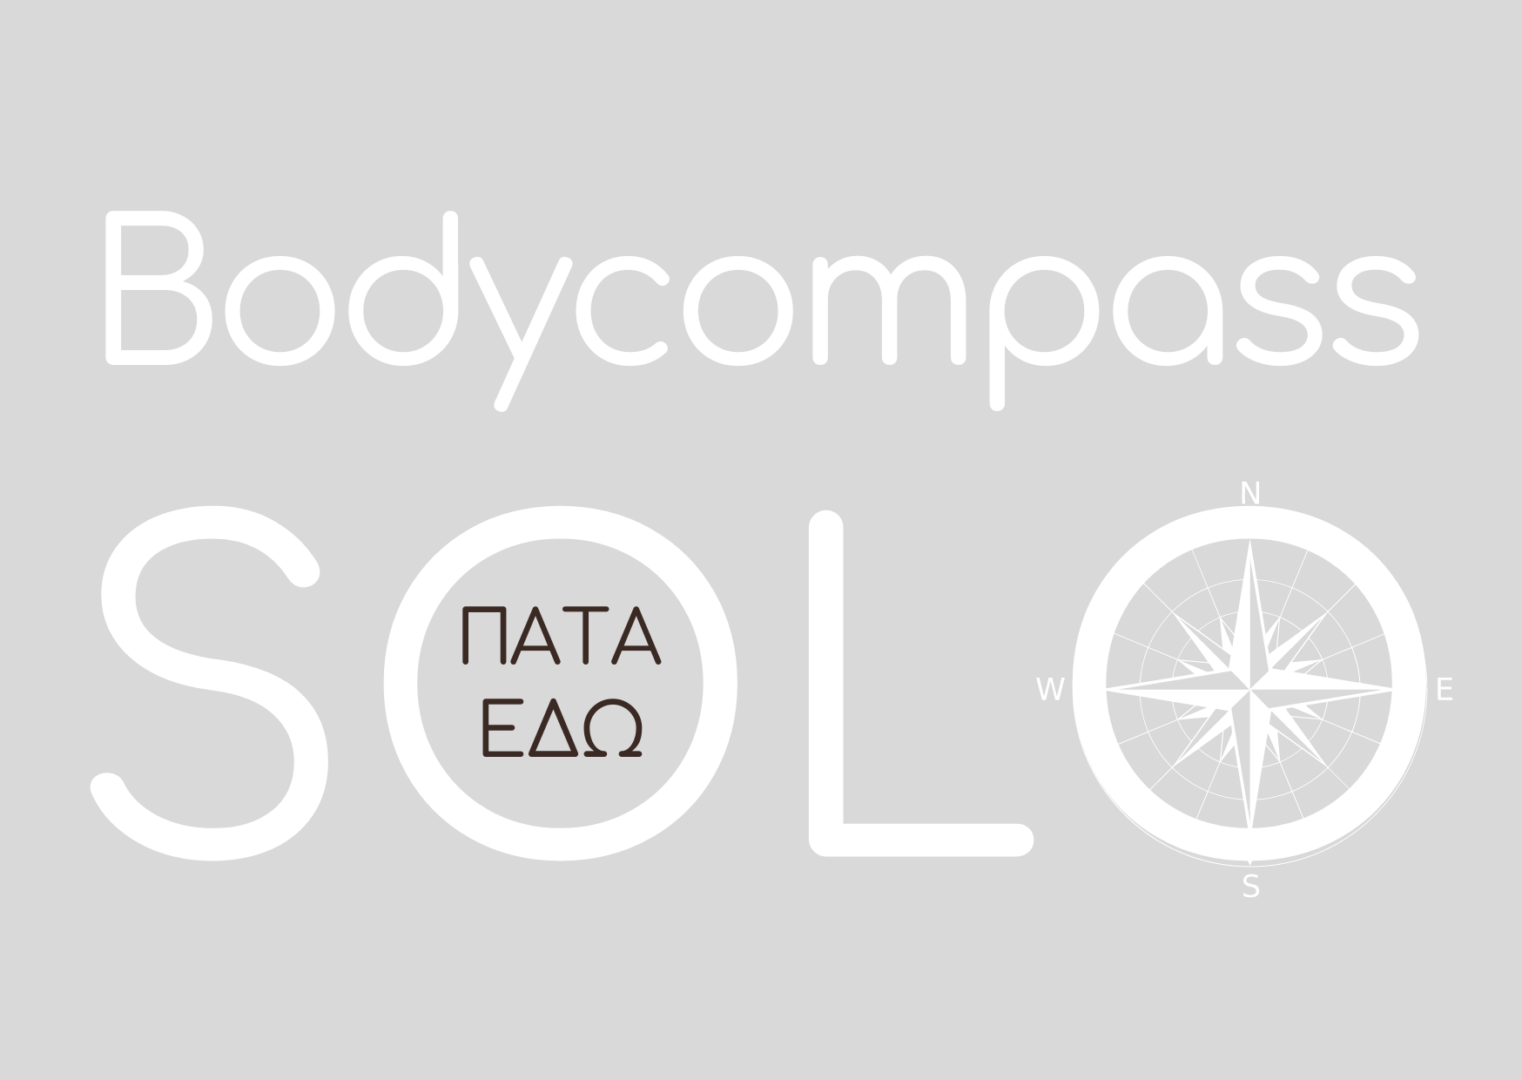 Bodycompass Solo